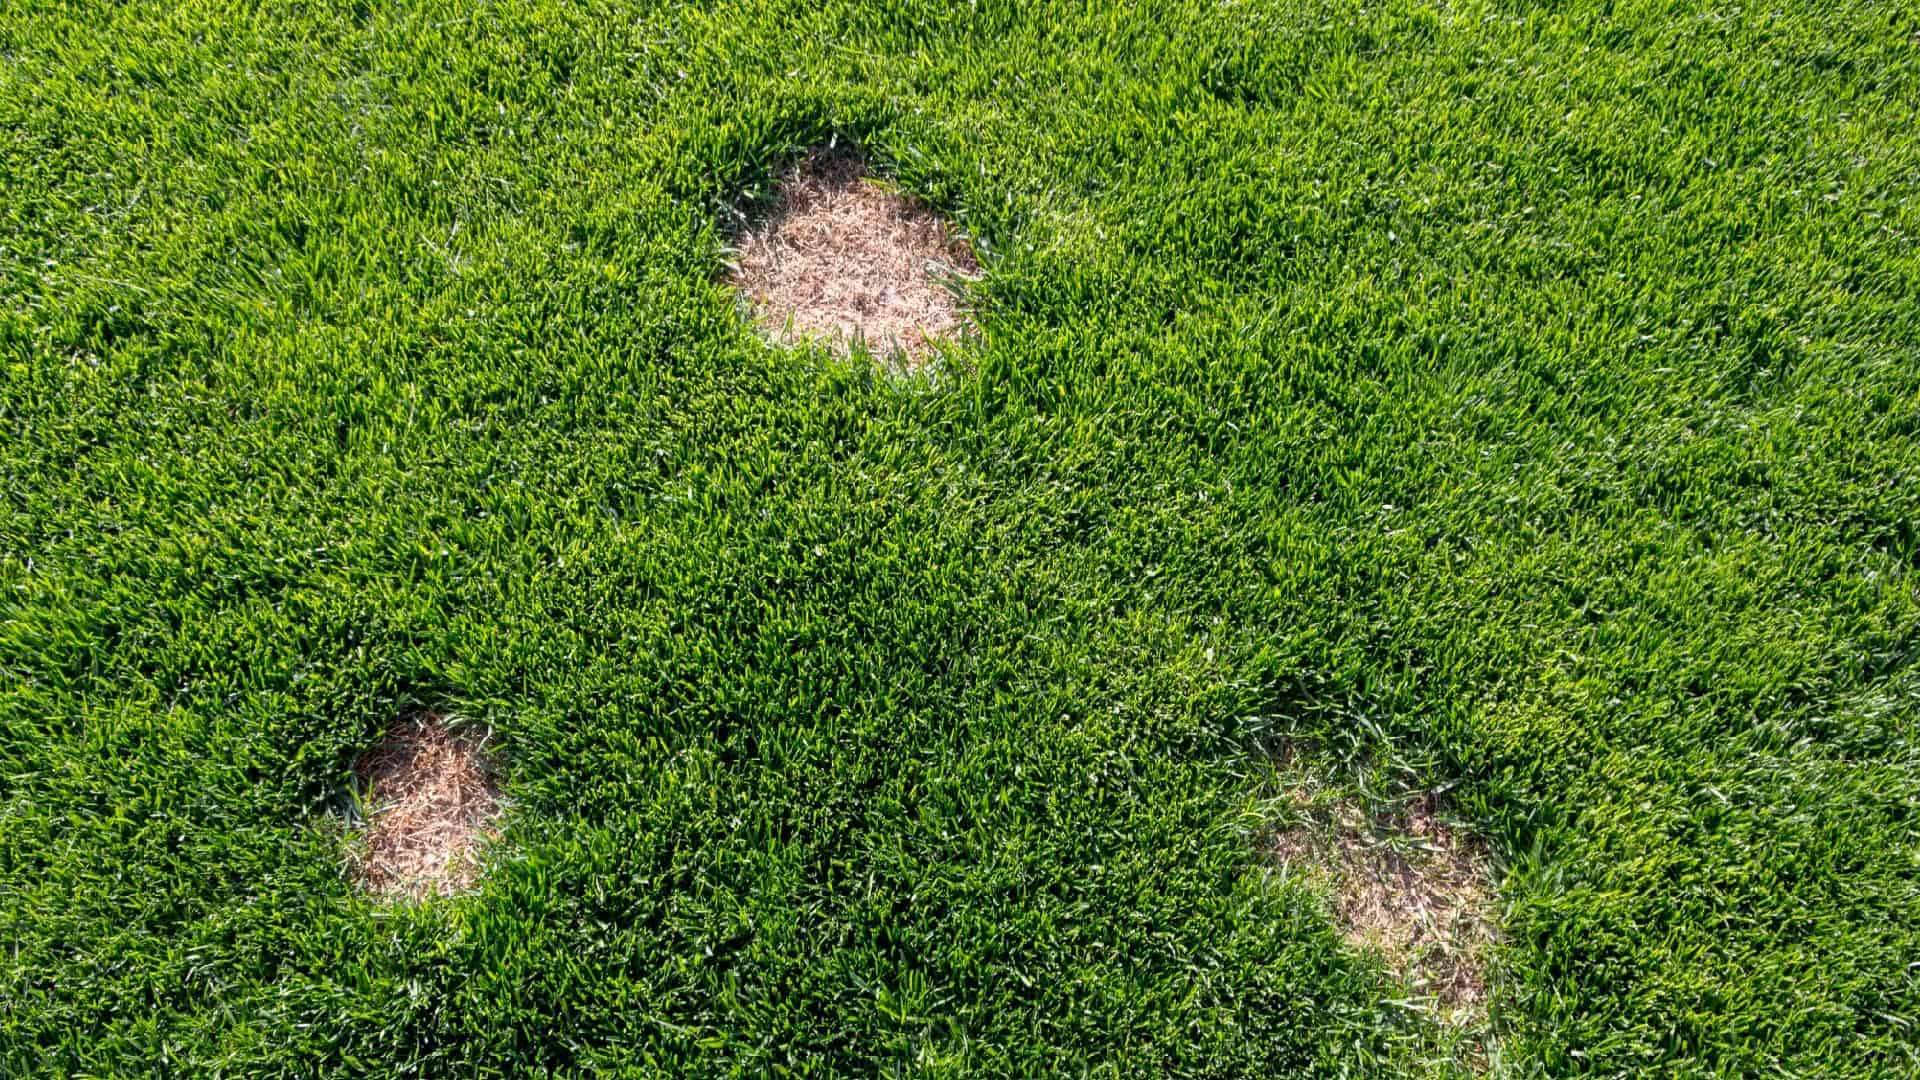 How to Stop Lawn Fungus